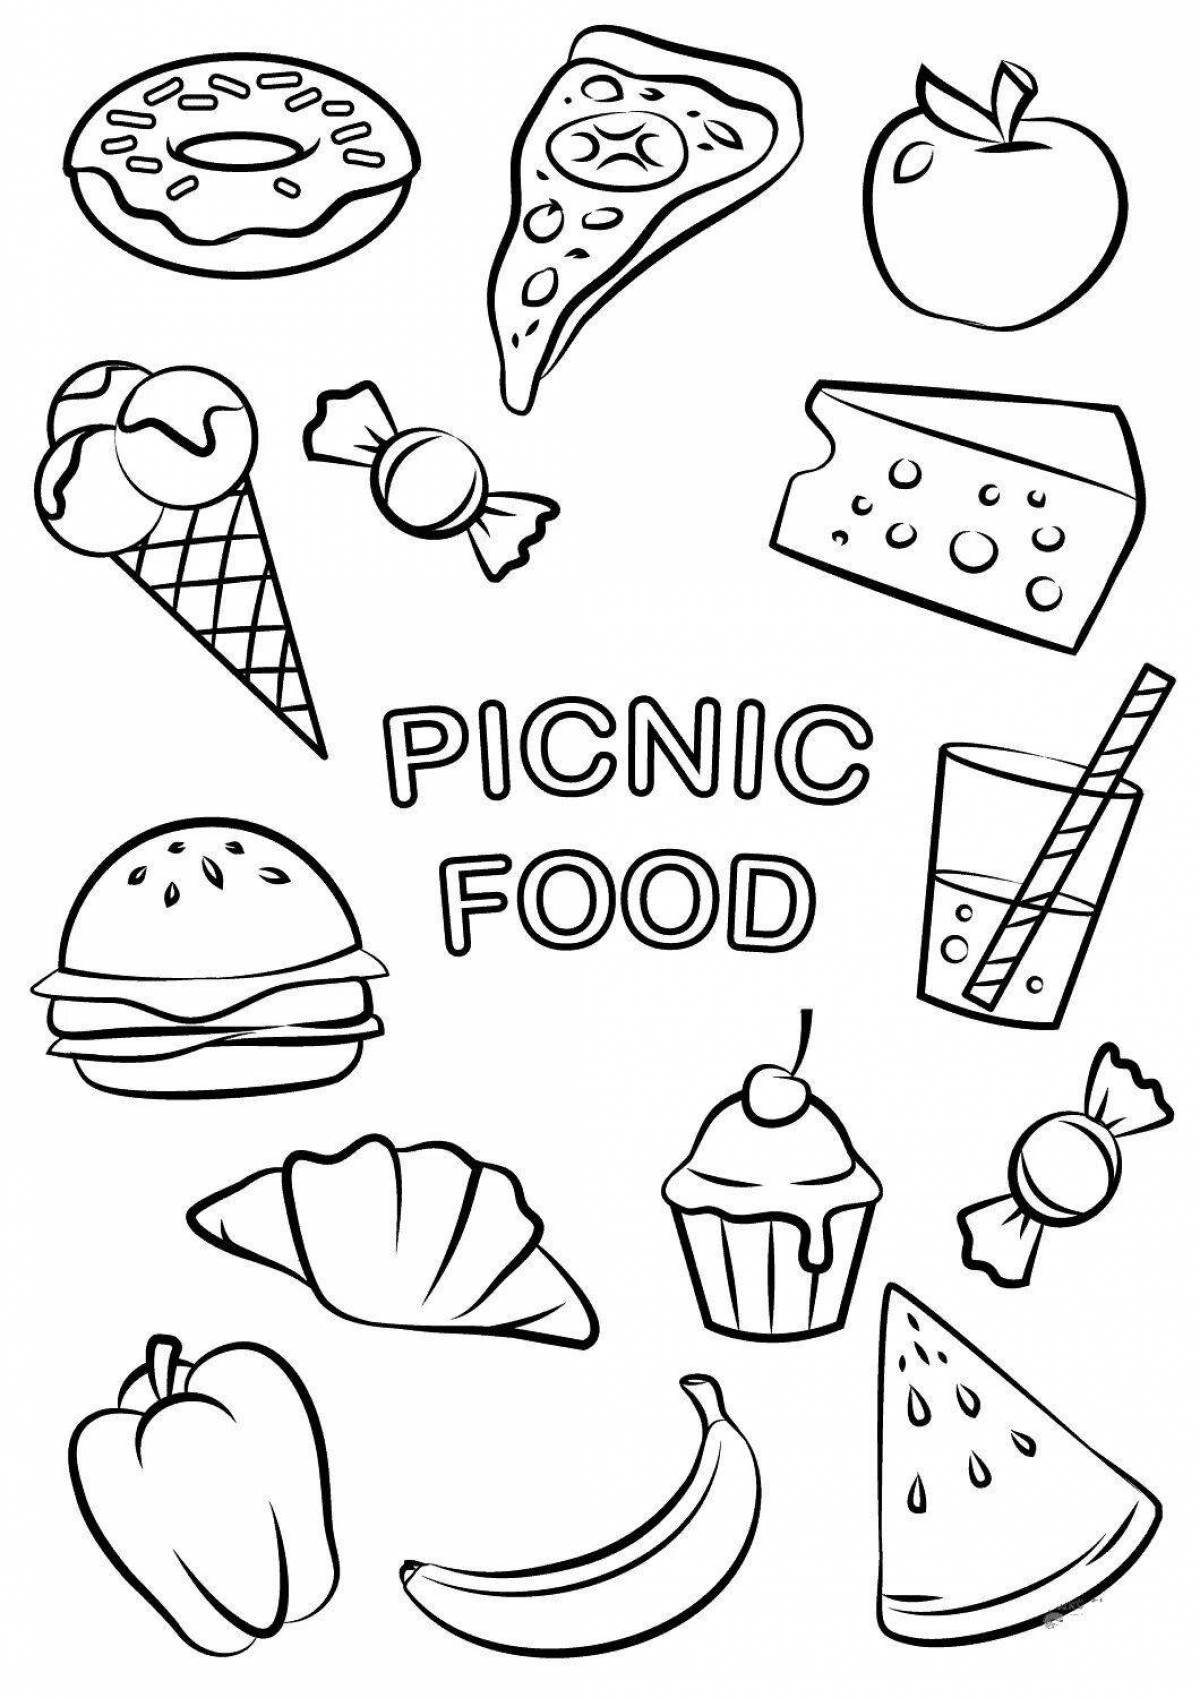 Splendid tasty and point coloring page